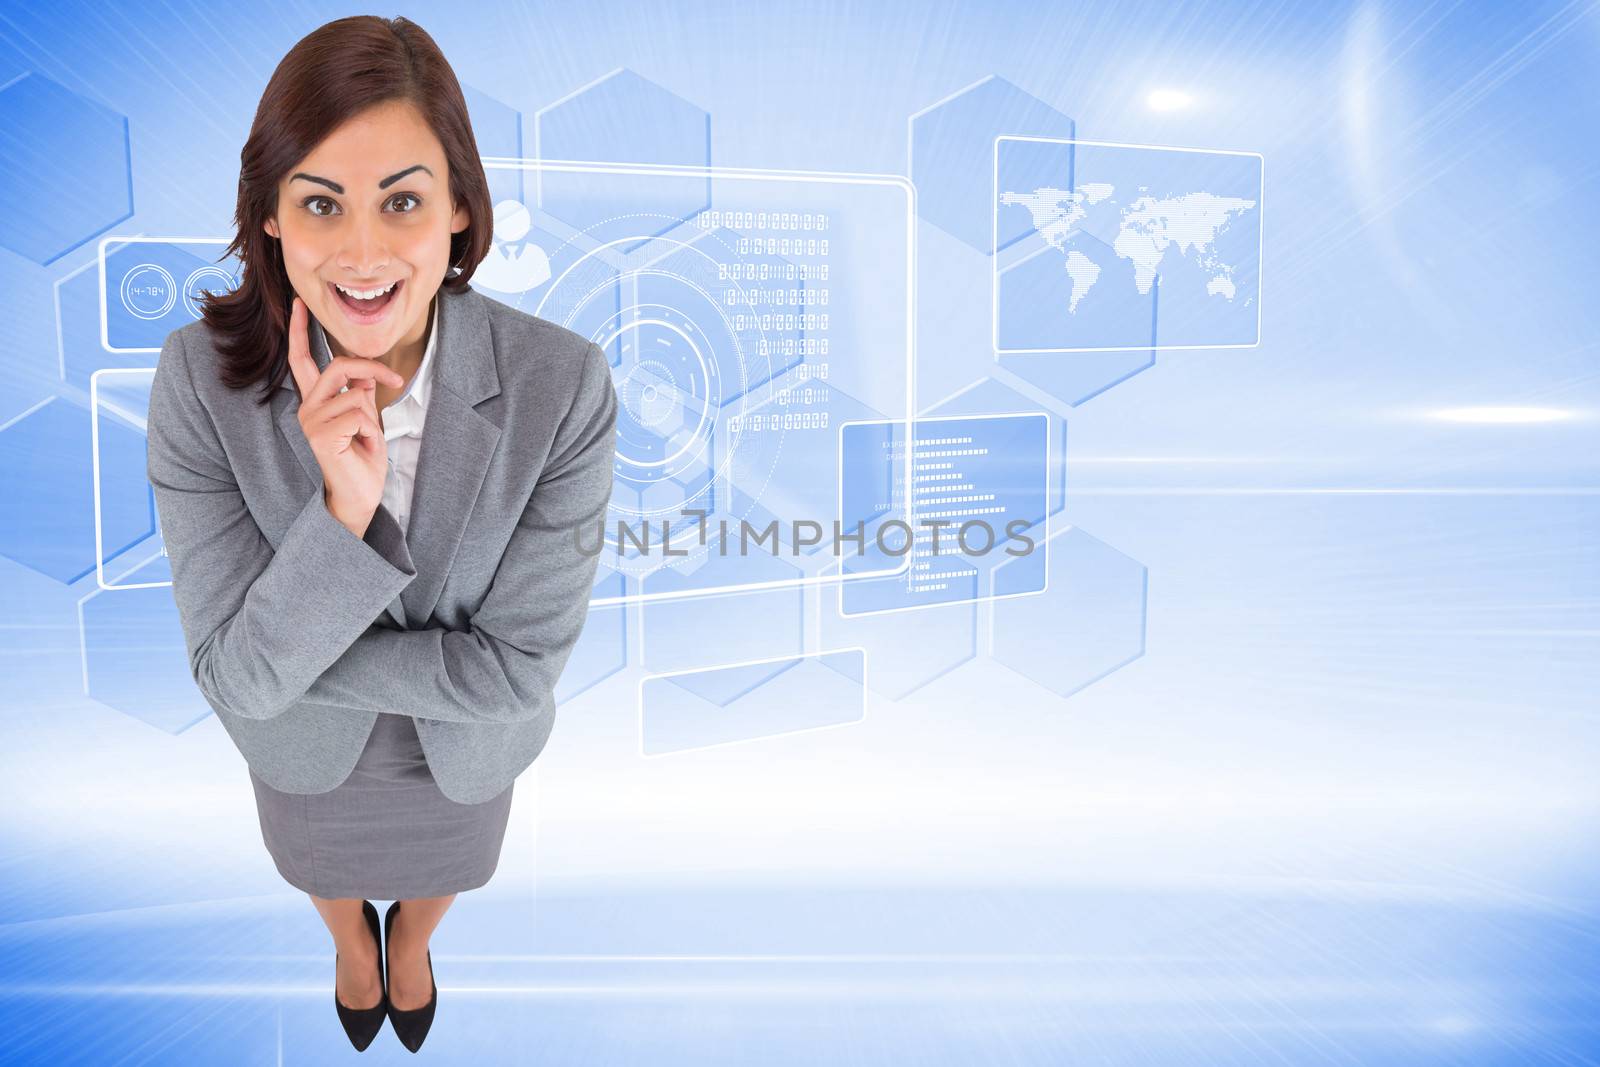 Composite image of smiling thoughtful businesswoman by Wavebreakmedia